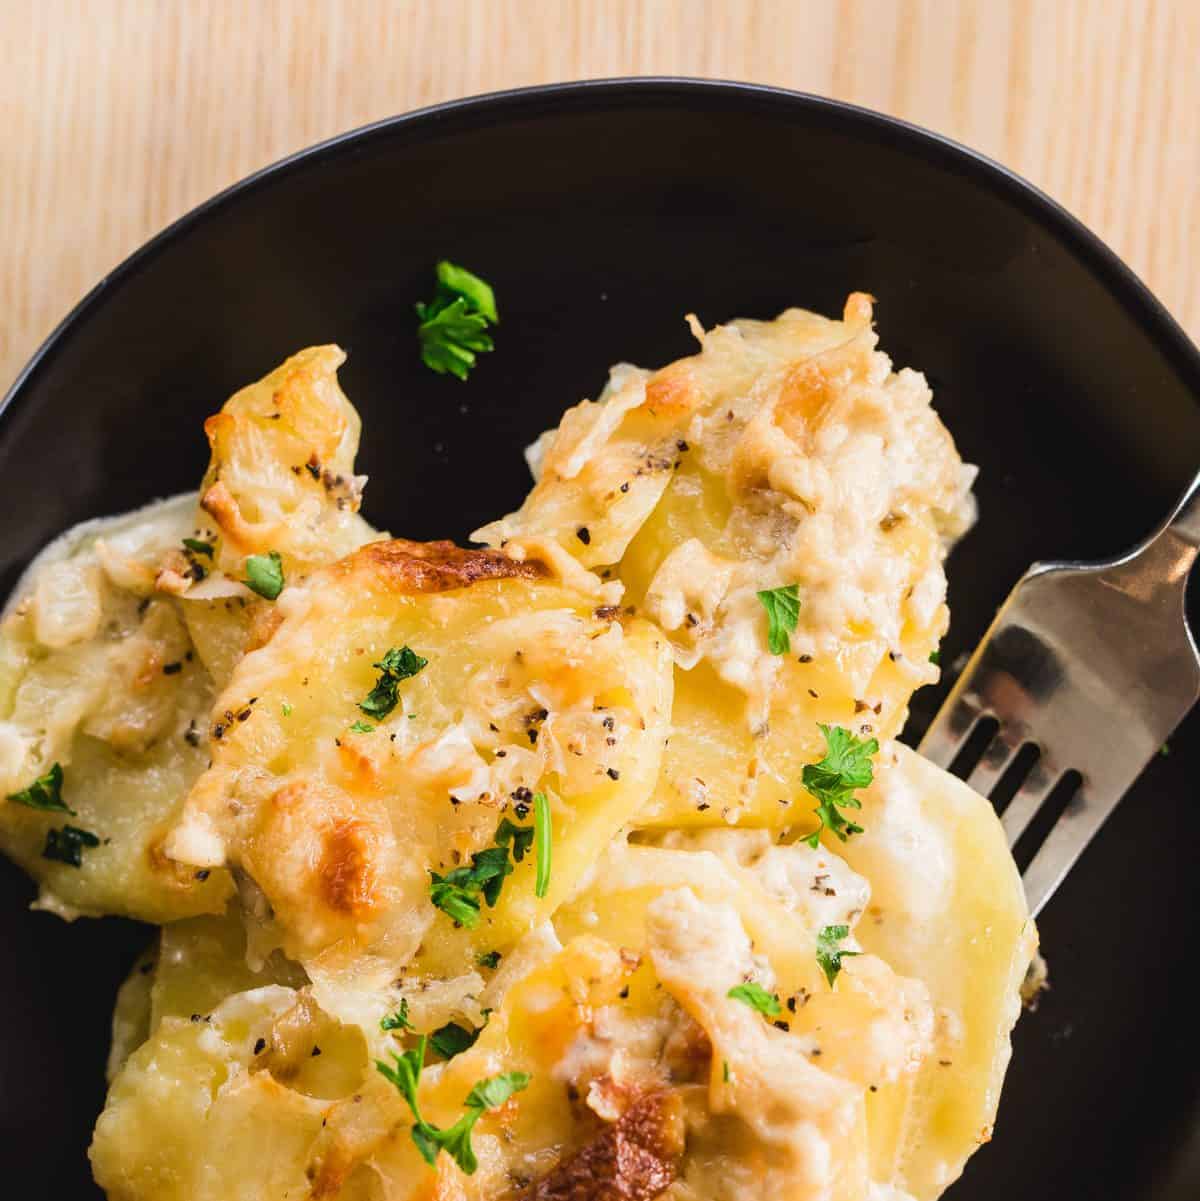 A serving of potatoes Au Gratin sits on a plate. Hot, ready to eat.